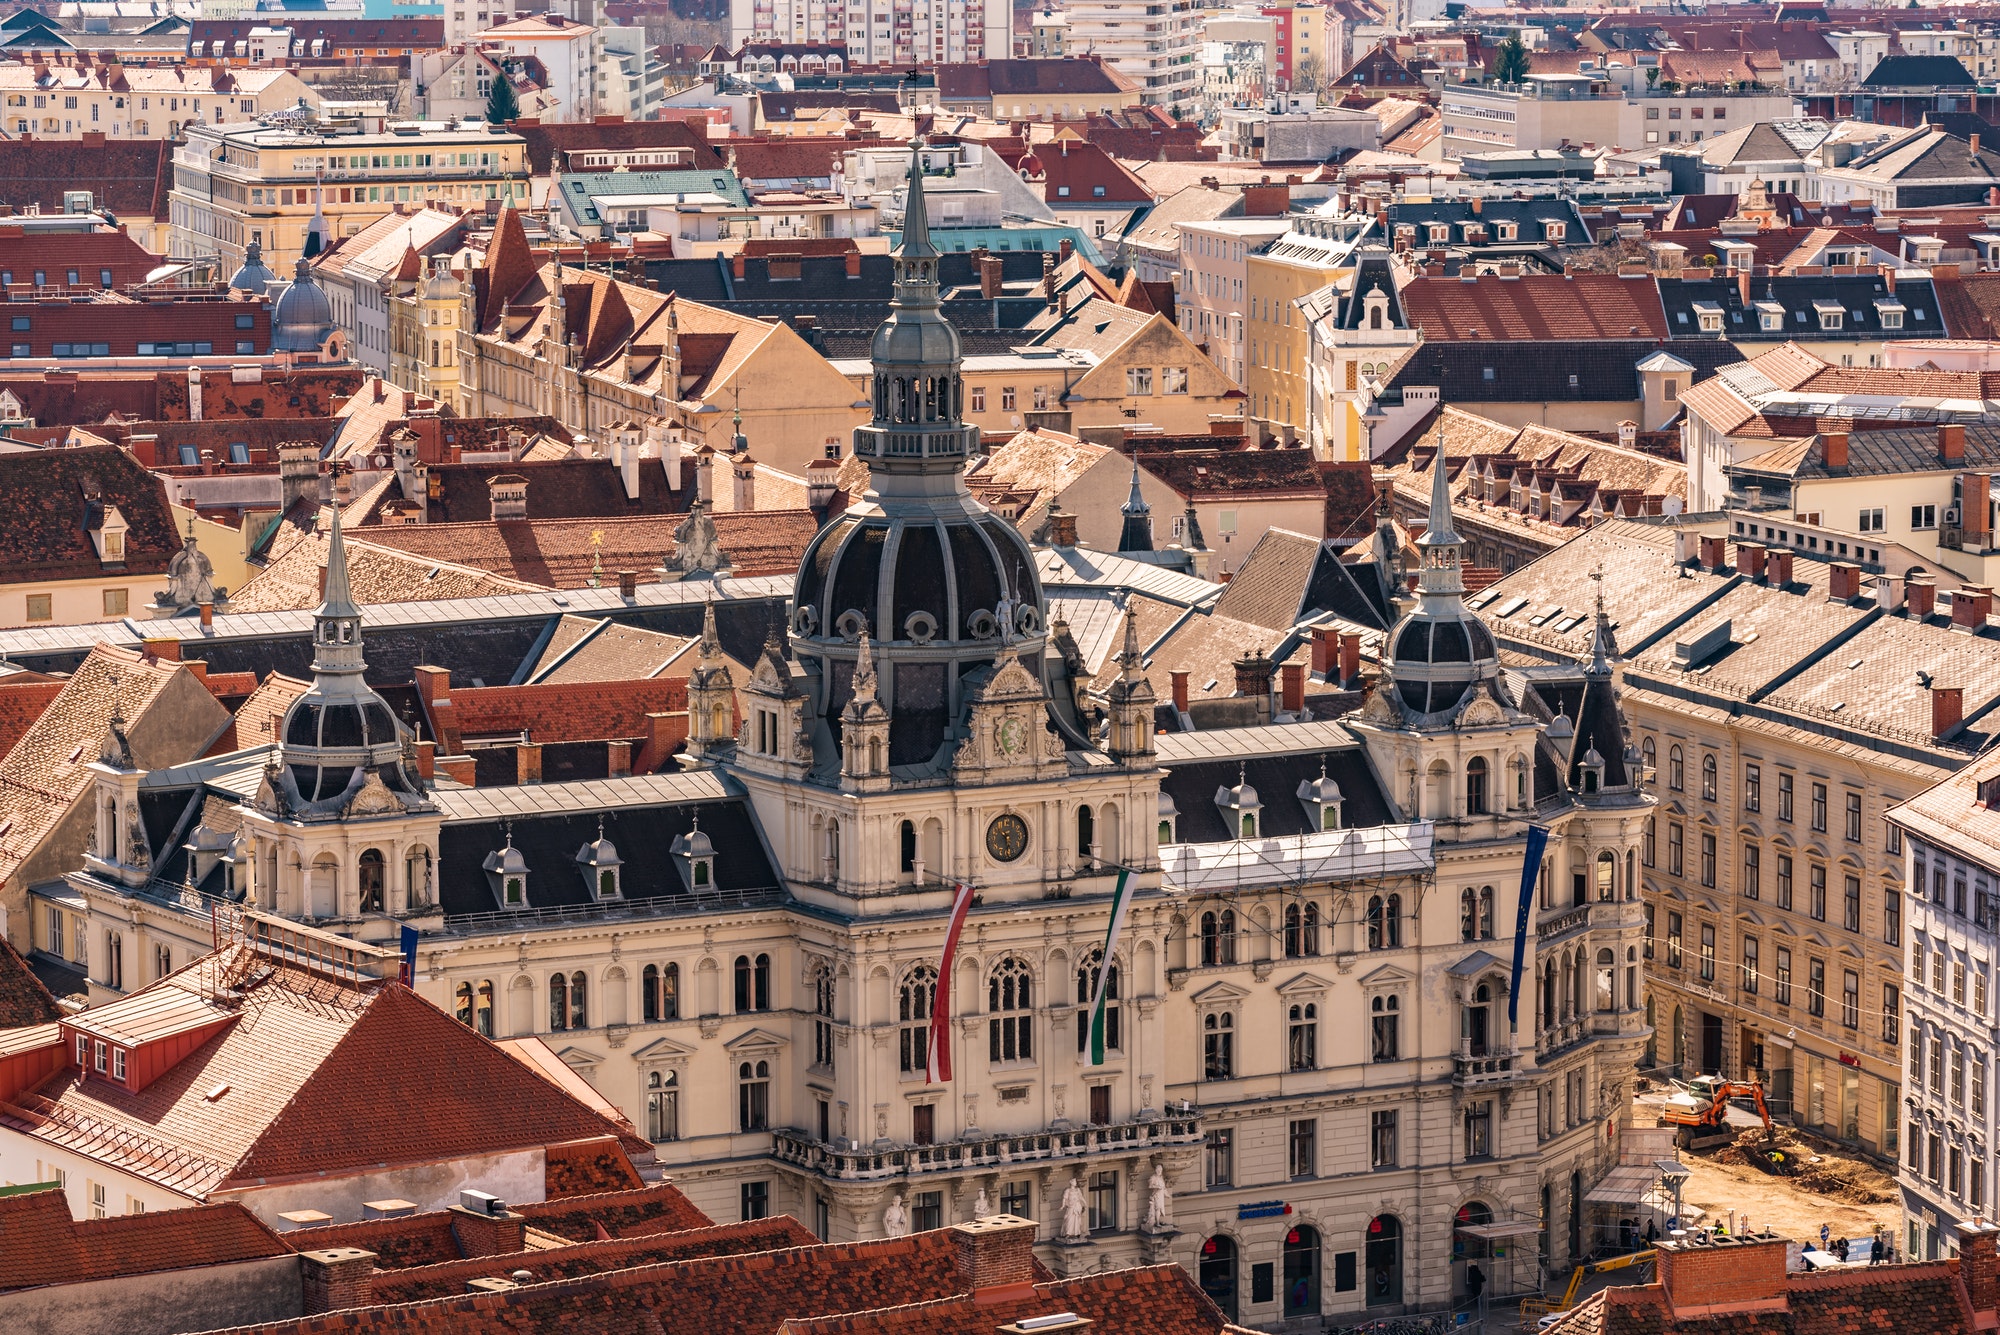 Cityscape of Graz with the Rathaus town hall and historic buildings, in Graz, Styria region, Austria